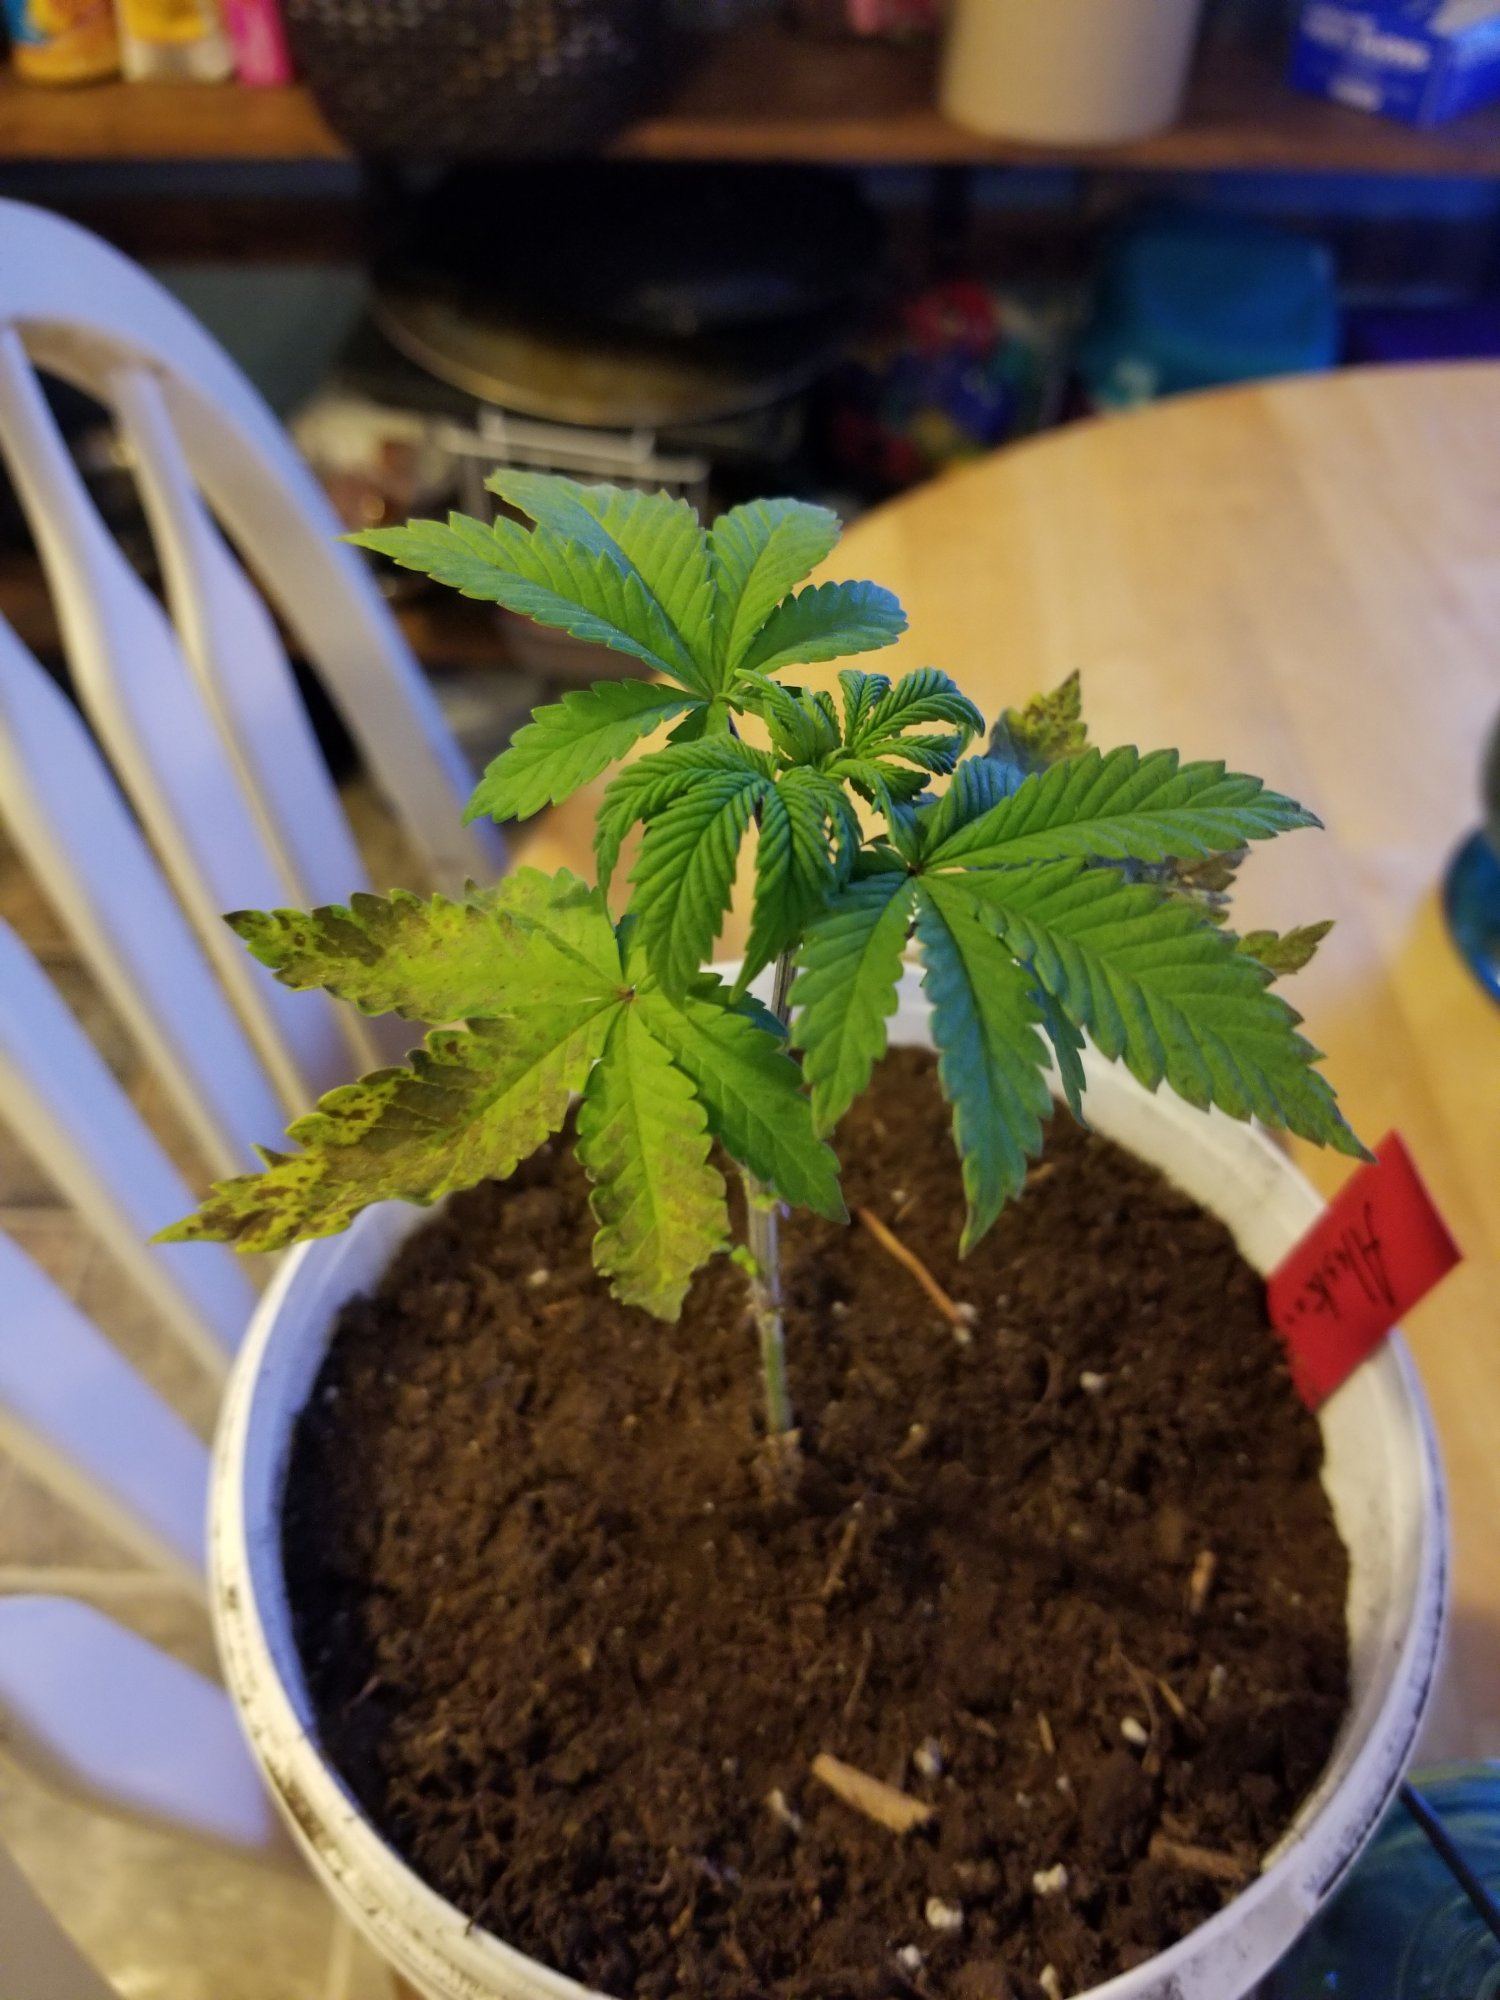 Help me please all of a sudden my bottom leaves started to die off